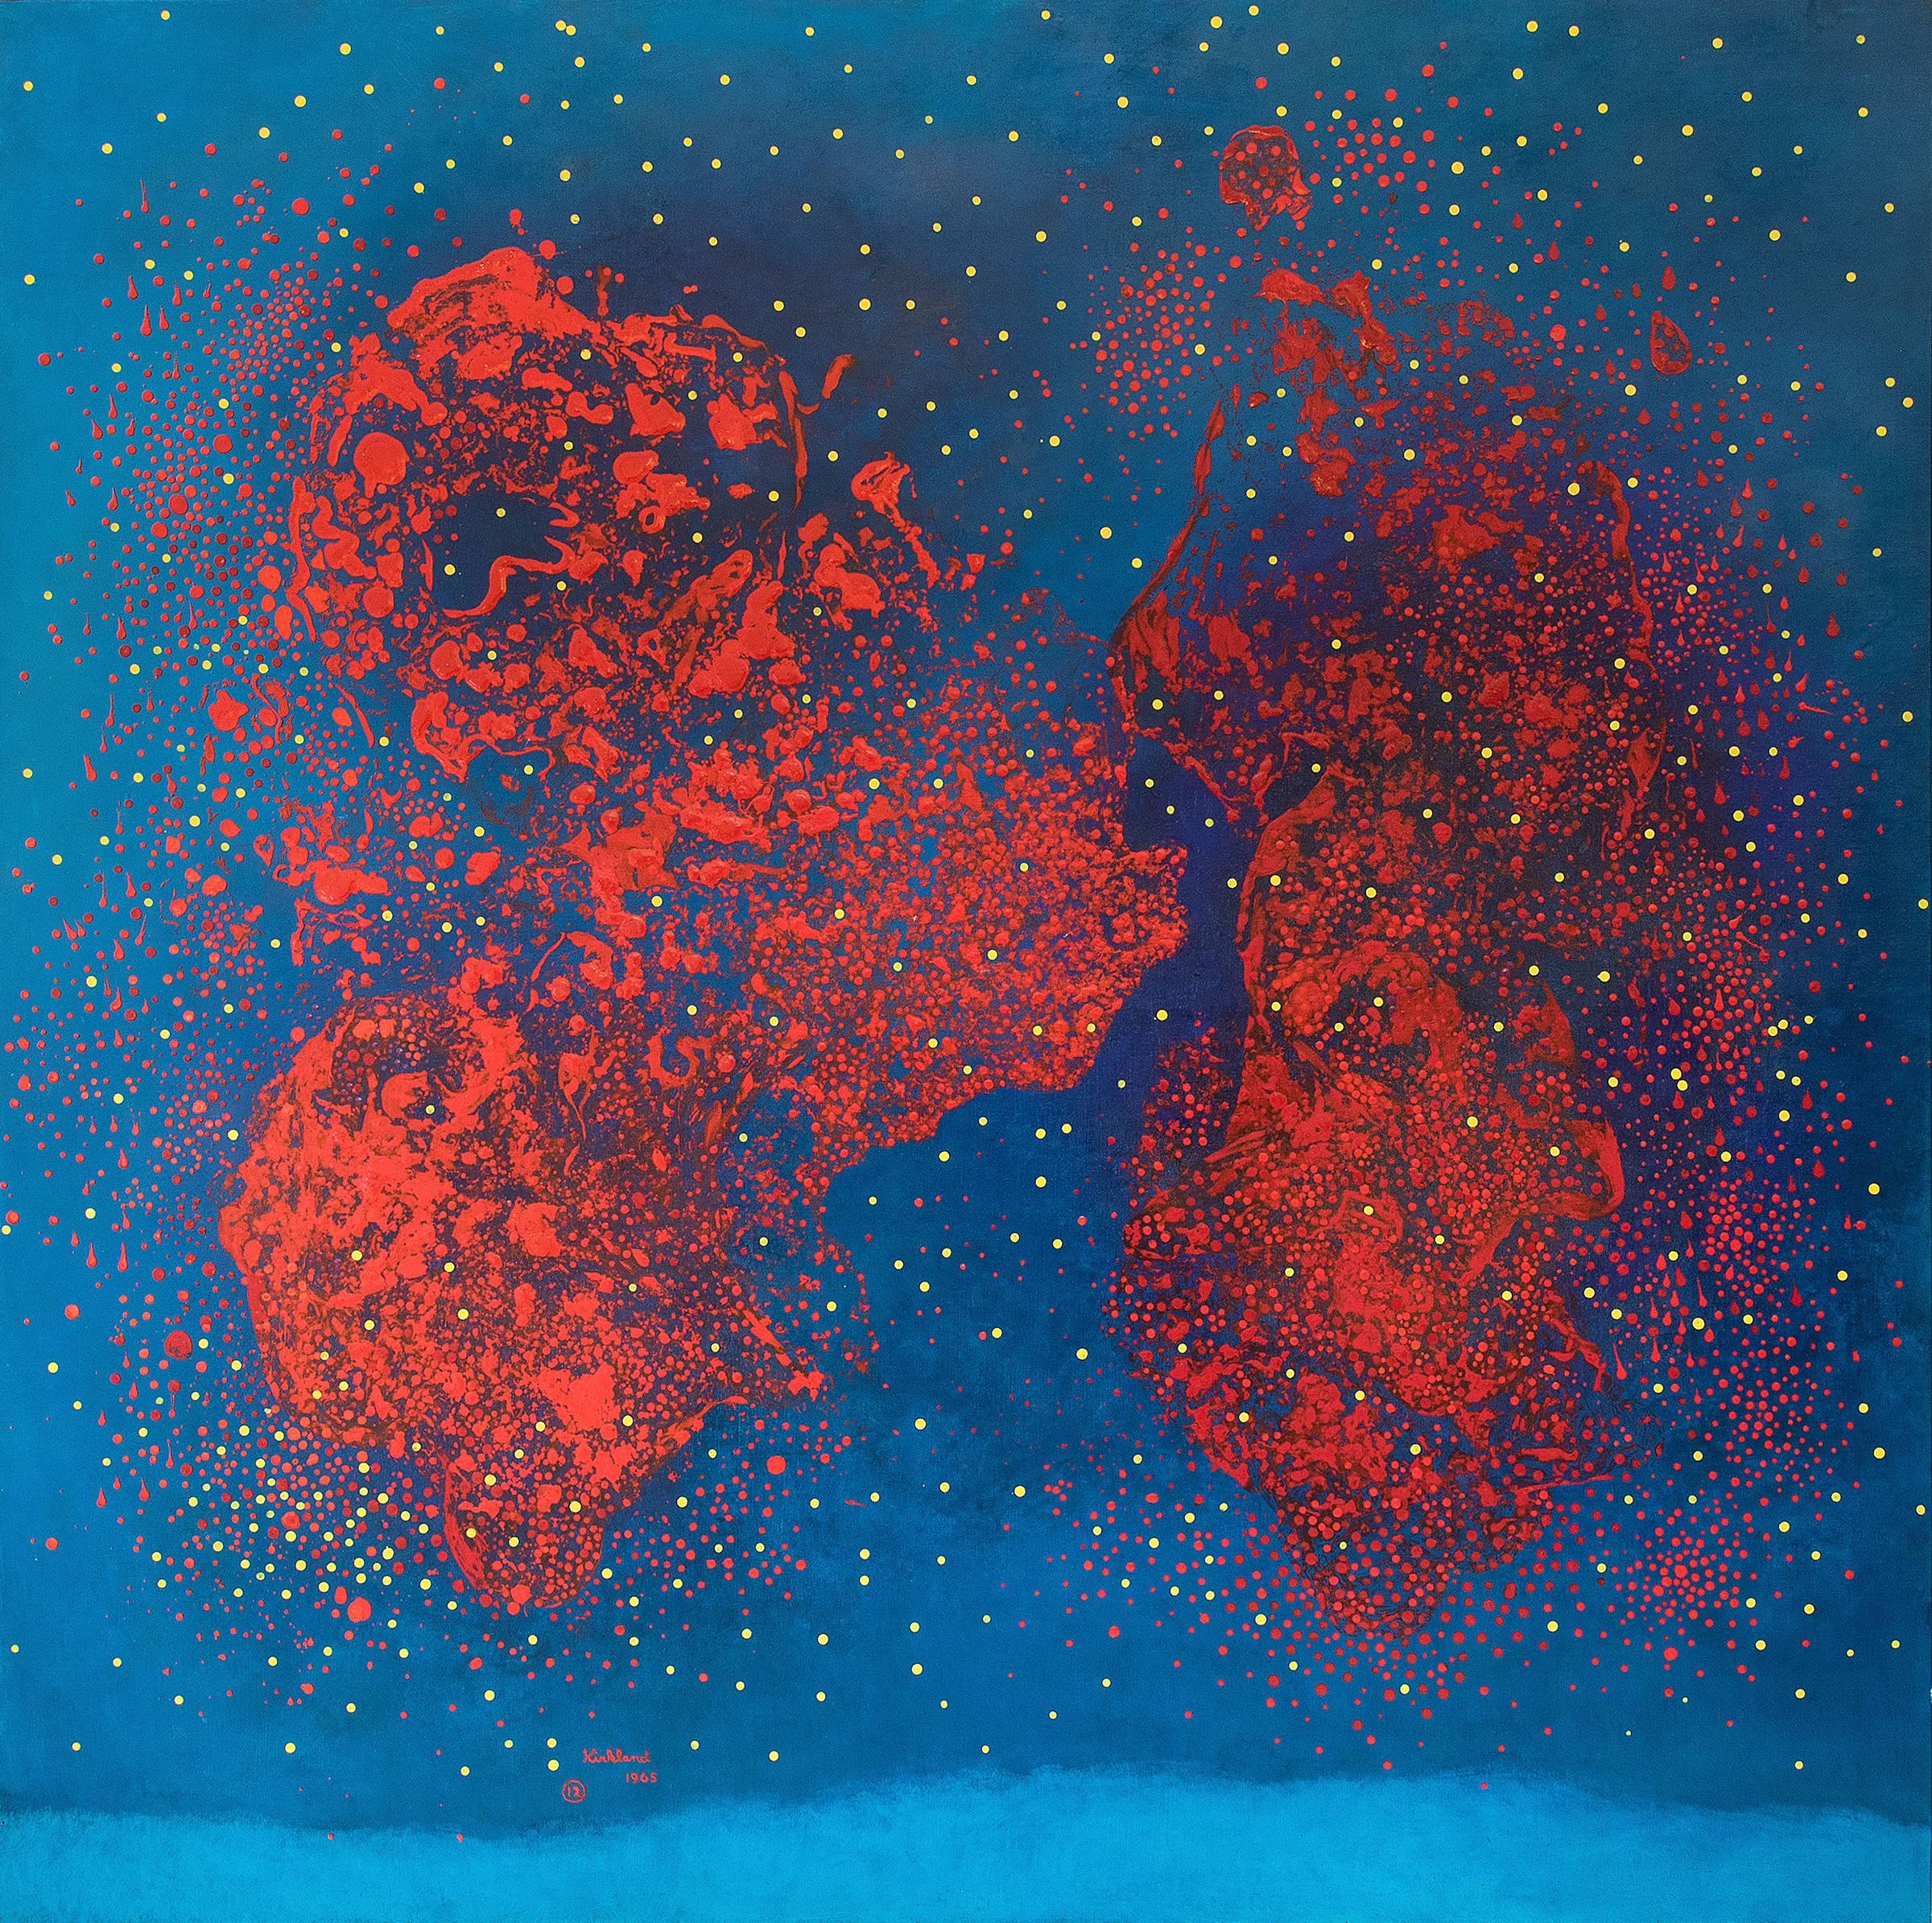 Vance Kirkland Abstract Painting - Reds on Blue - Number 12 (Energy of Vibrations in Space Series)